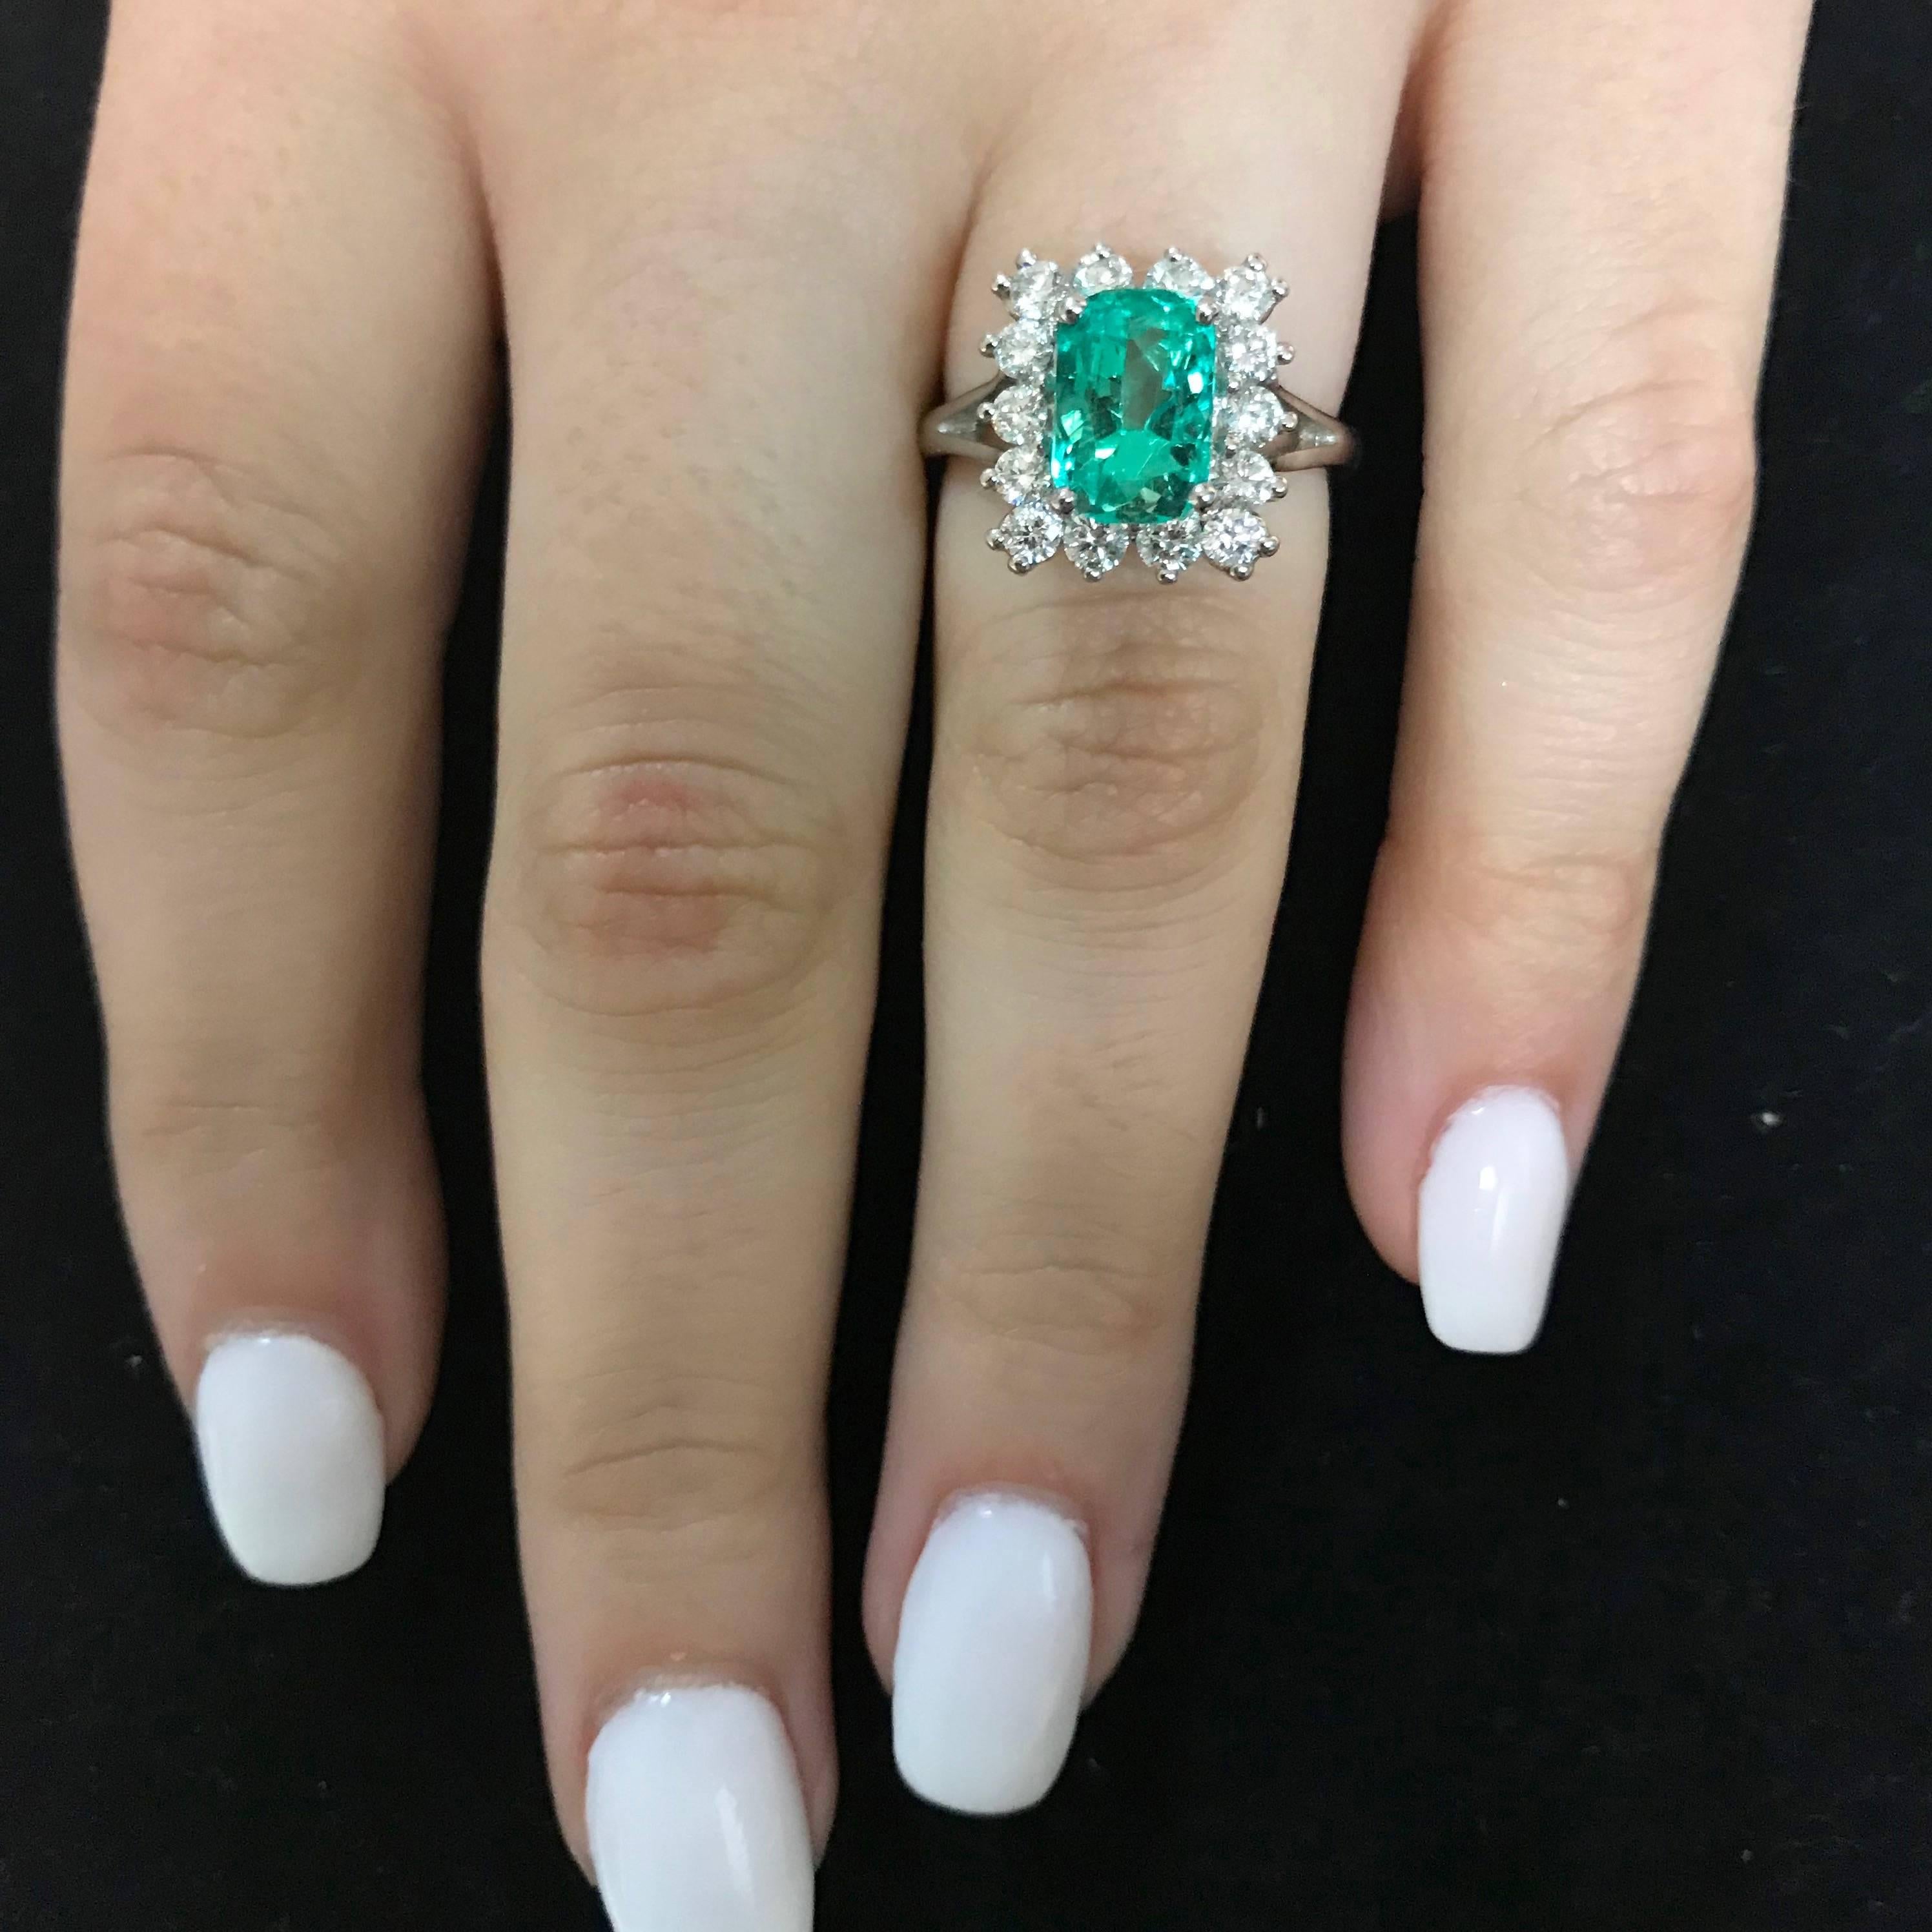 Material: 14k White Gold
Gemstones: 1 Emerald Cut Emerald at 2.14 Carats. 
Diamonds: 14 Brilliant Round White Diamonds at 0.60 Carats. Clarity SI. Color: H-I.
Ring Size: 6.25 (Can be sized)

Fine one-of-a kind craftsmanship meets incredible quality